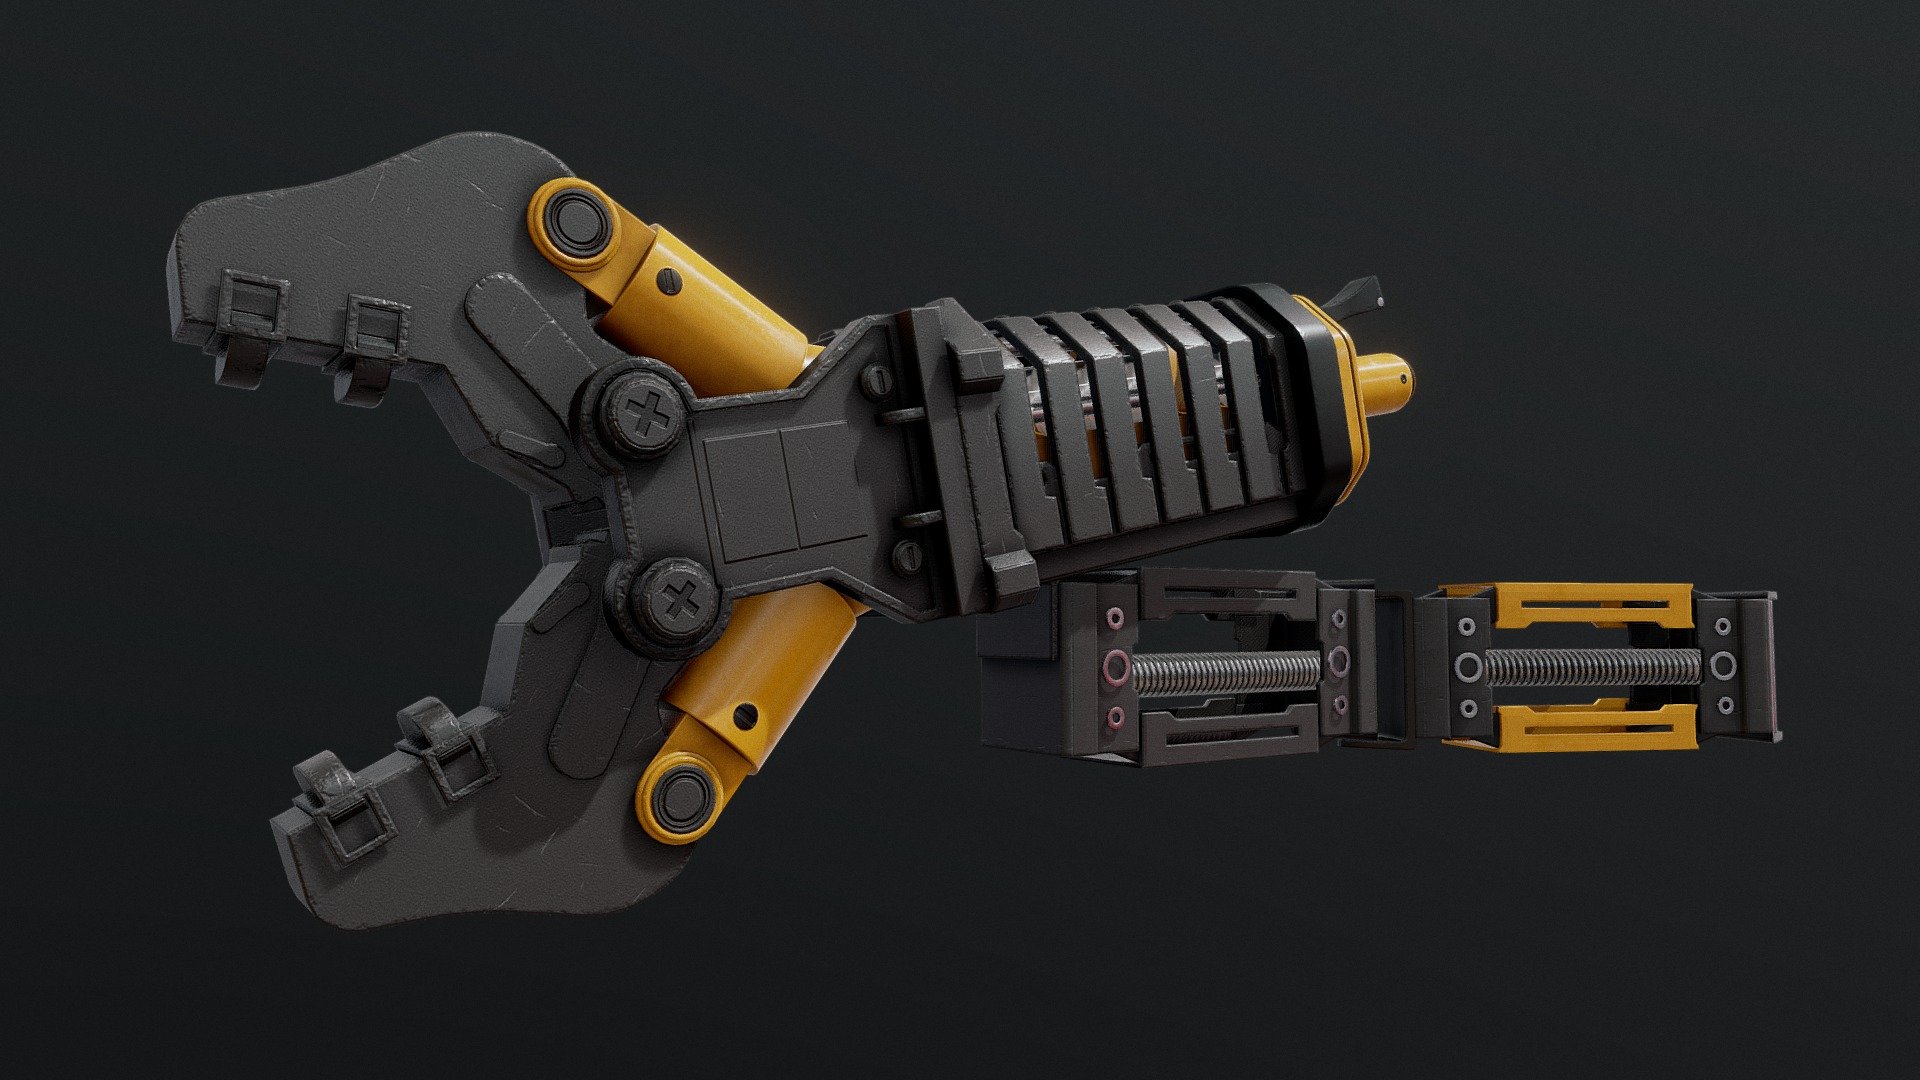 Robot arm, modeled in Blender, textured in Substance Painter.

Original concept from the Half-Life:Alyx concept art released in &ldquo;The Final Hours of Half-Life: Alyx